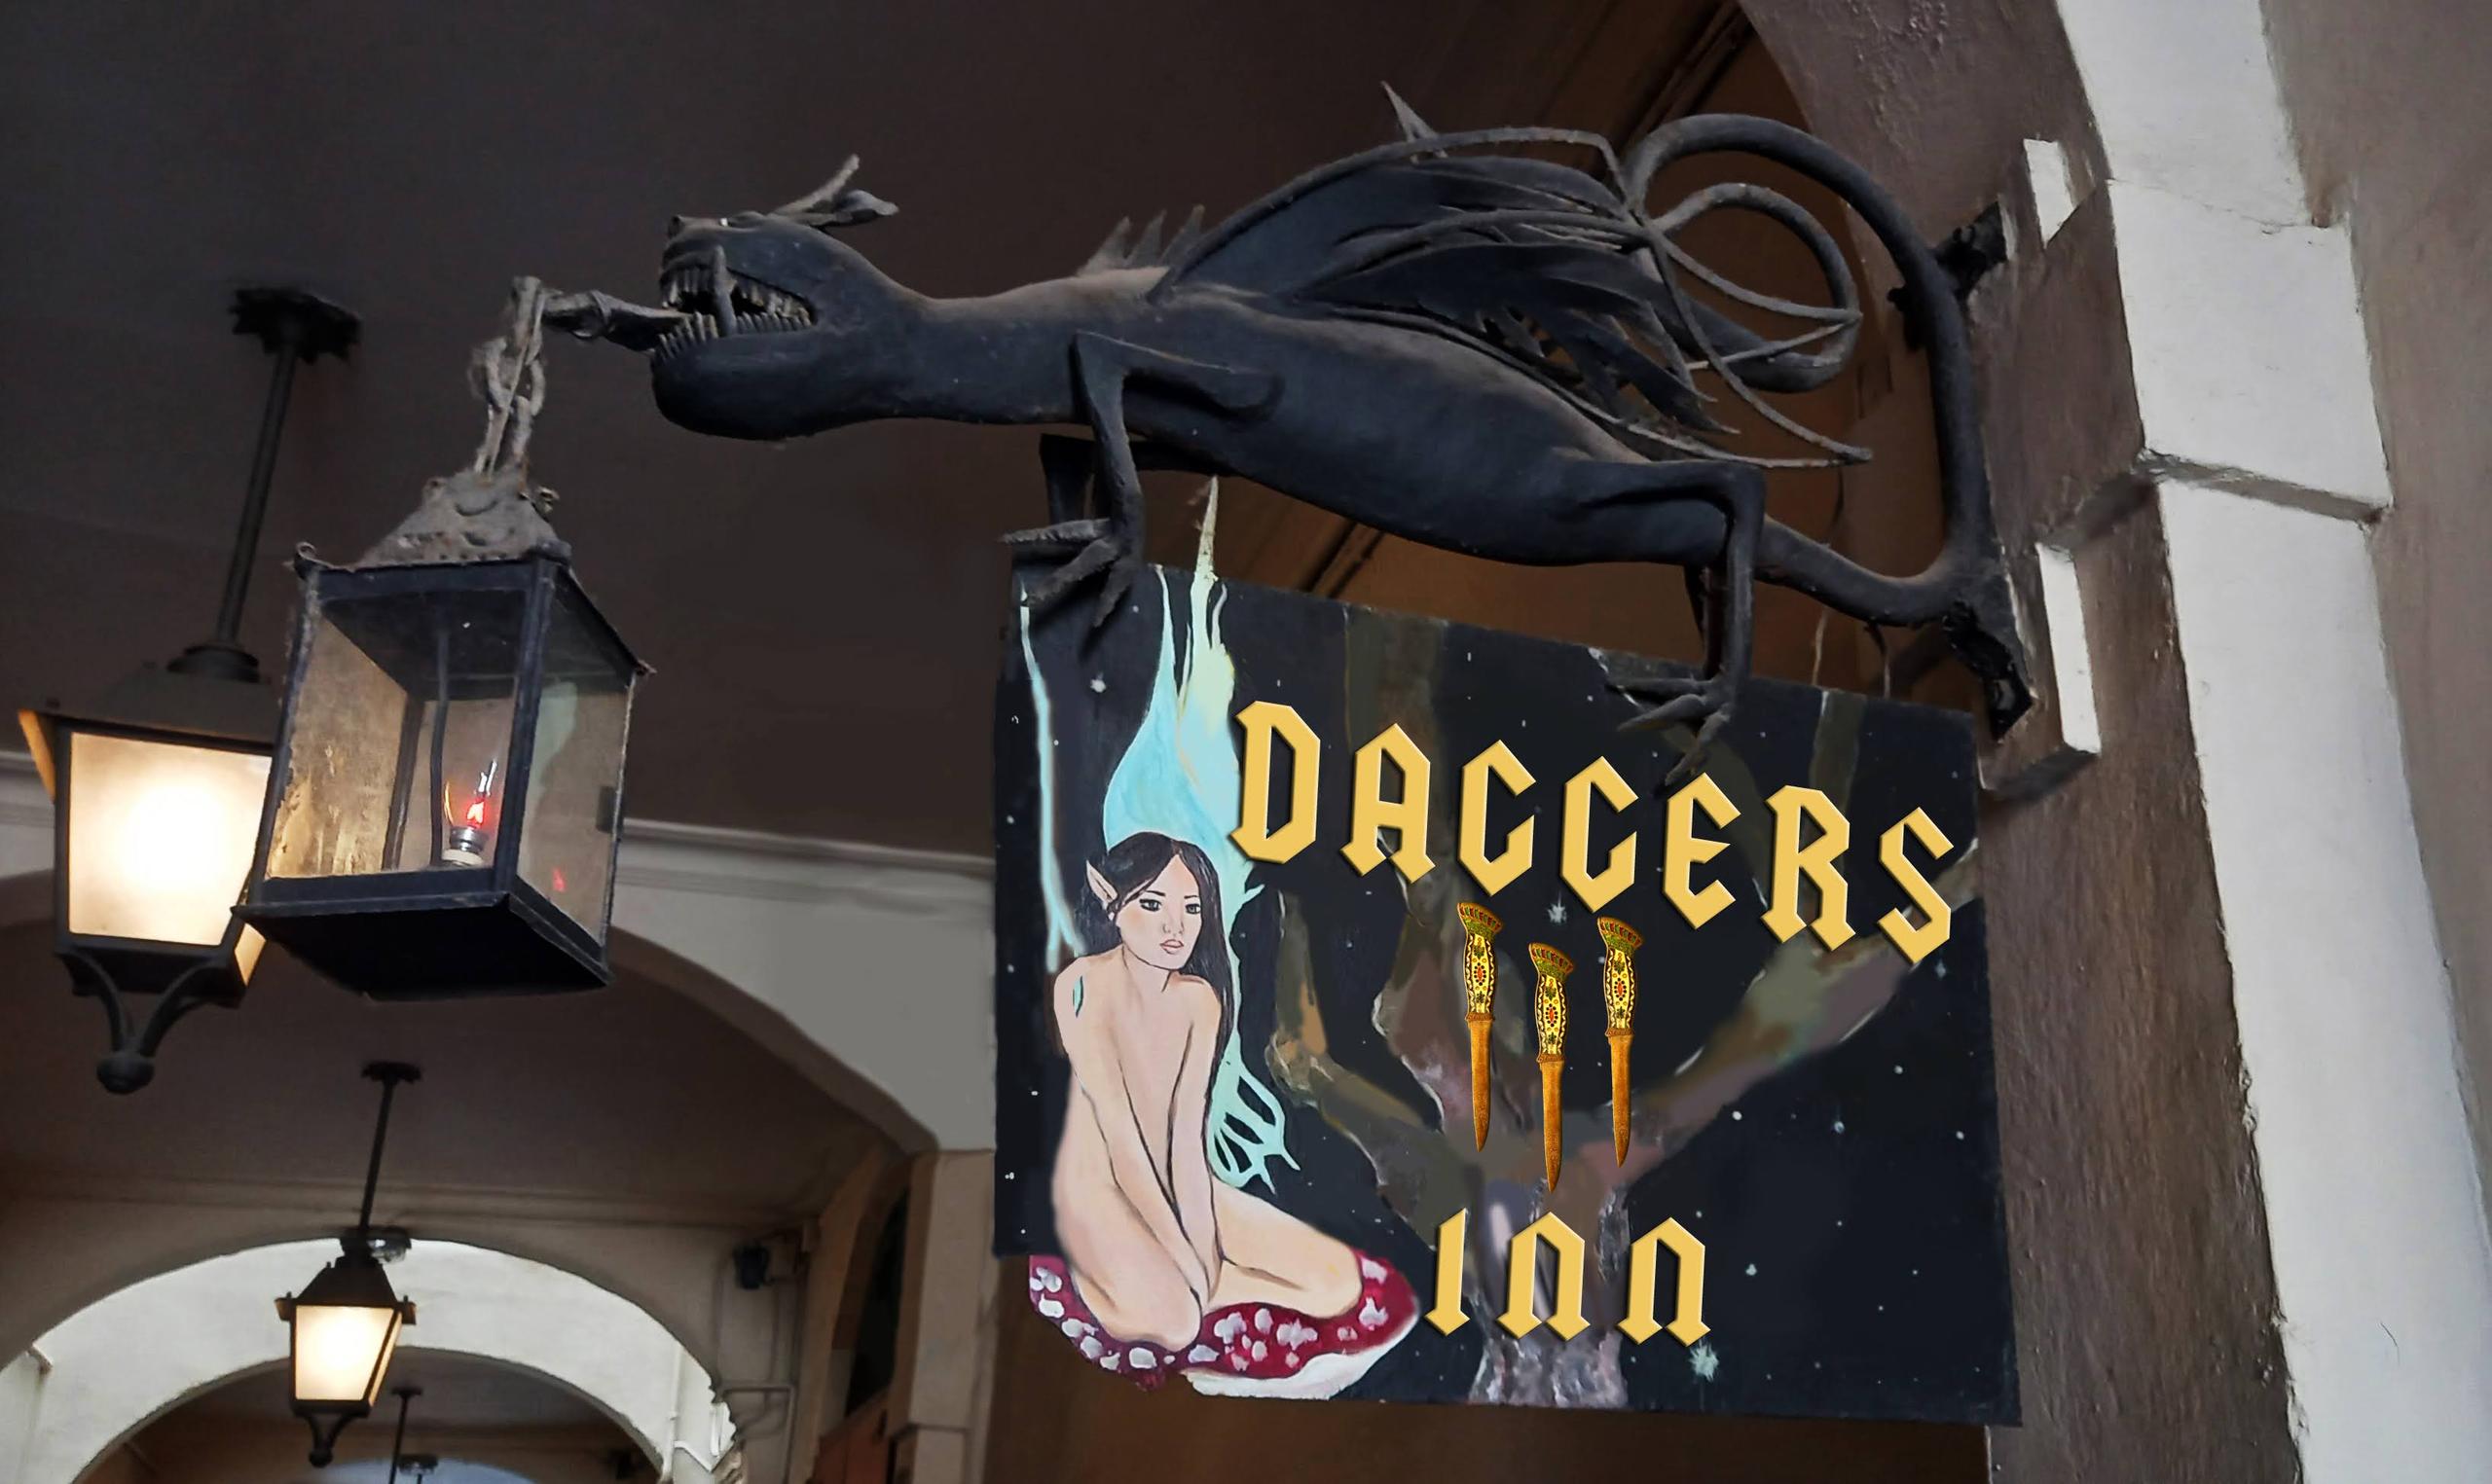 Daggers Inn crowdfunding campaign launches